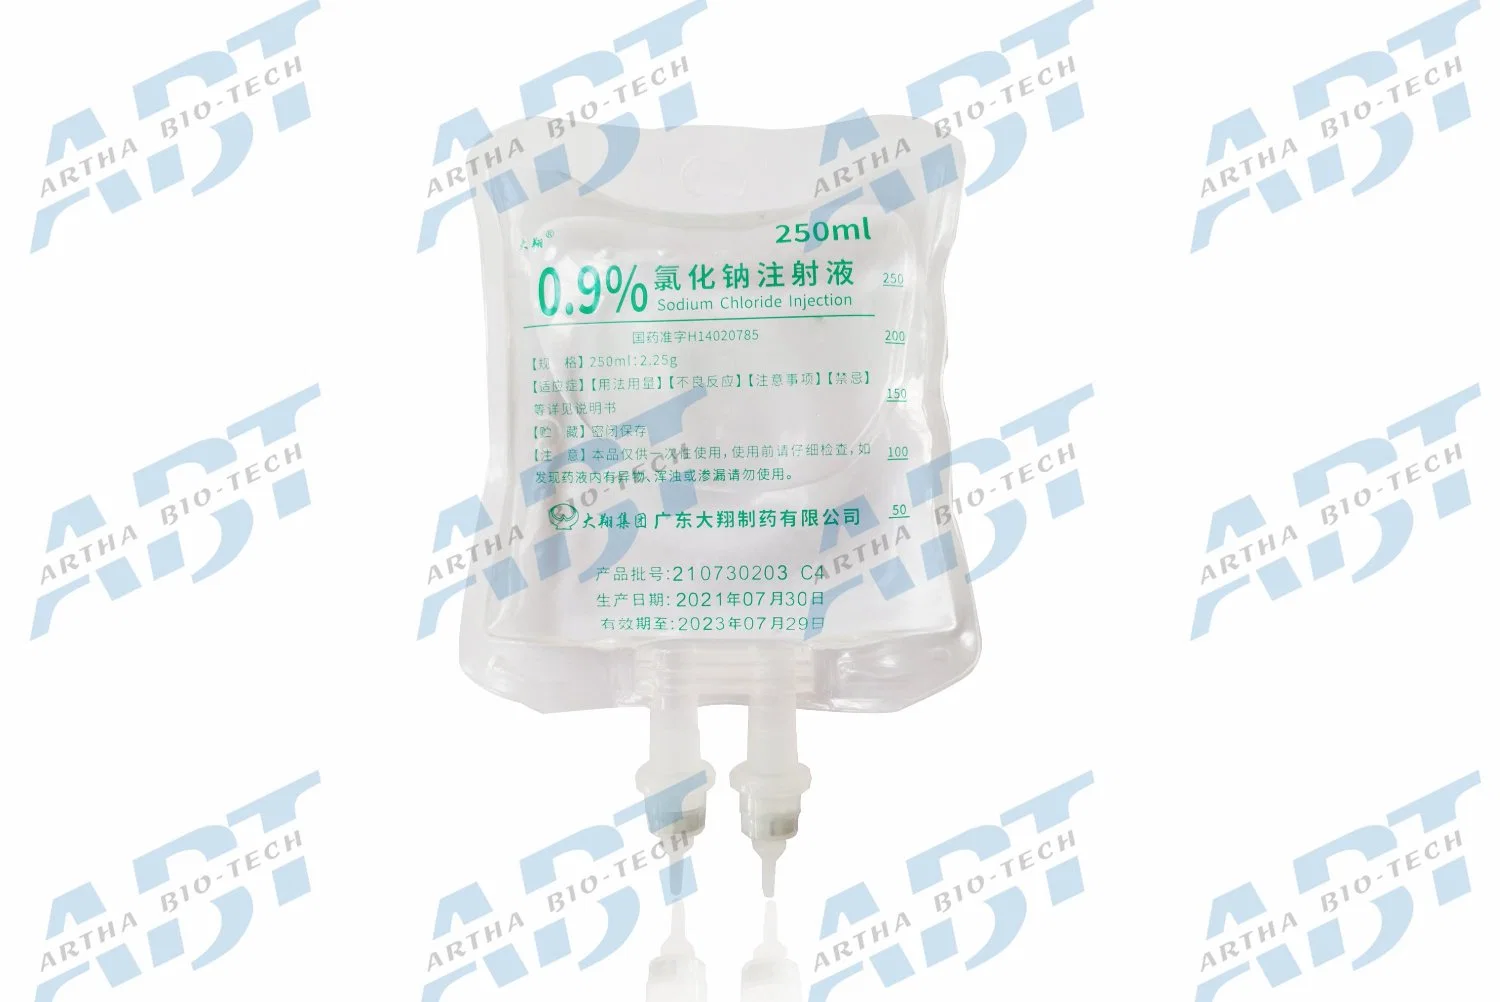 Medical and Health/Medical Products/Finished Medicine/Drug/Pharmaceuticals/Infusion/Intravenous 250ml 0.9% Sodium Chloride Injection